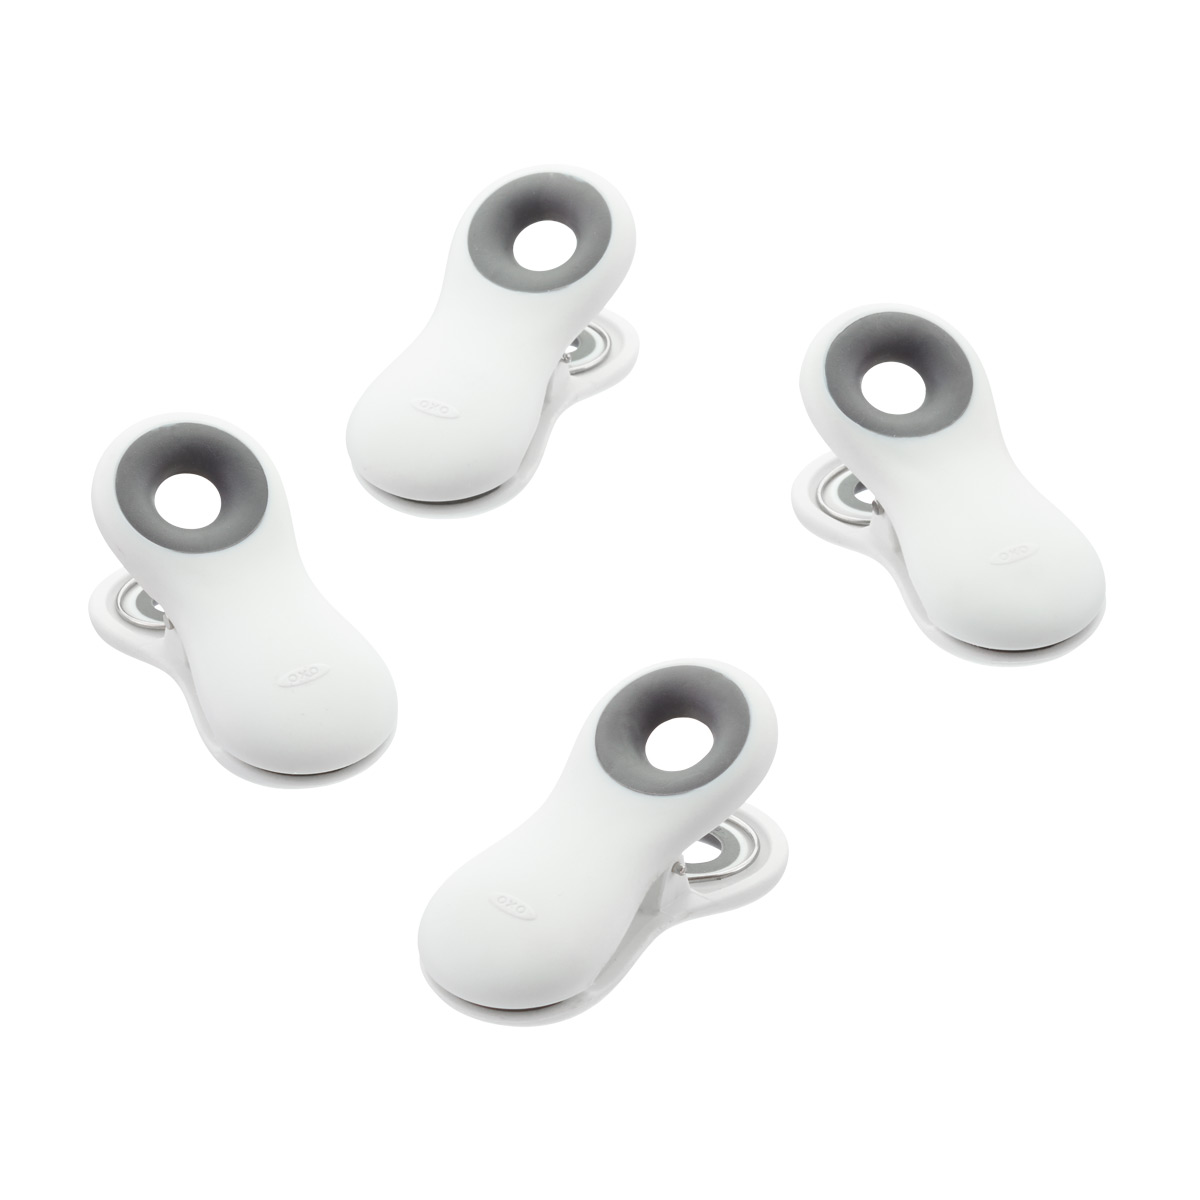 https://www.containerstore.com/catalogimages/310130/503060-good-grips-magnetic-clips-whi.jpg